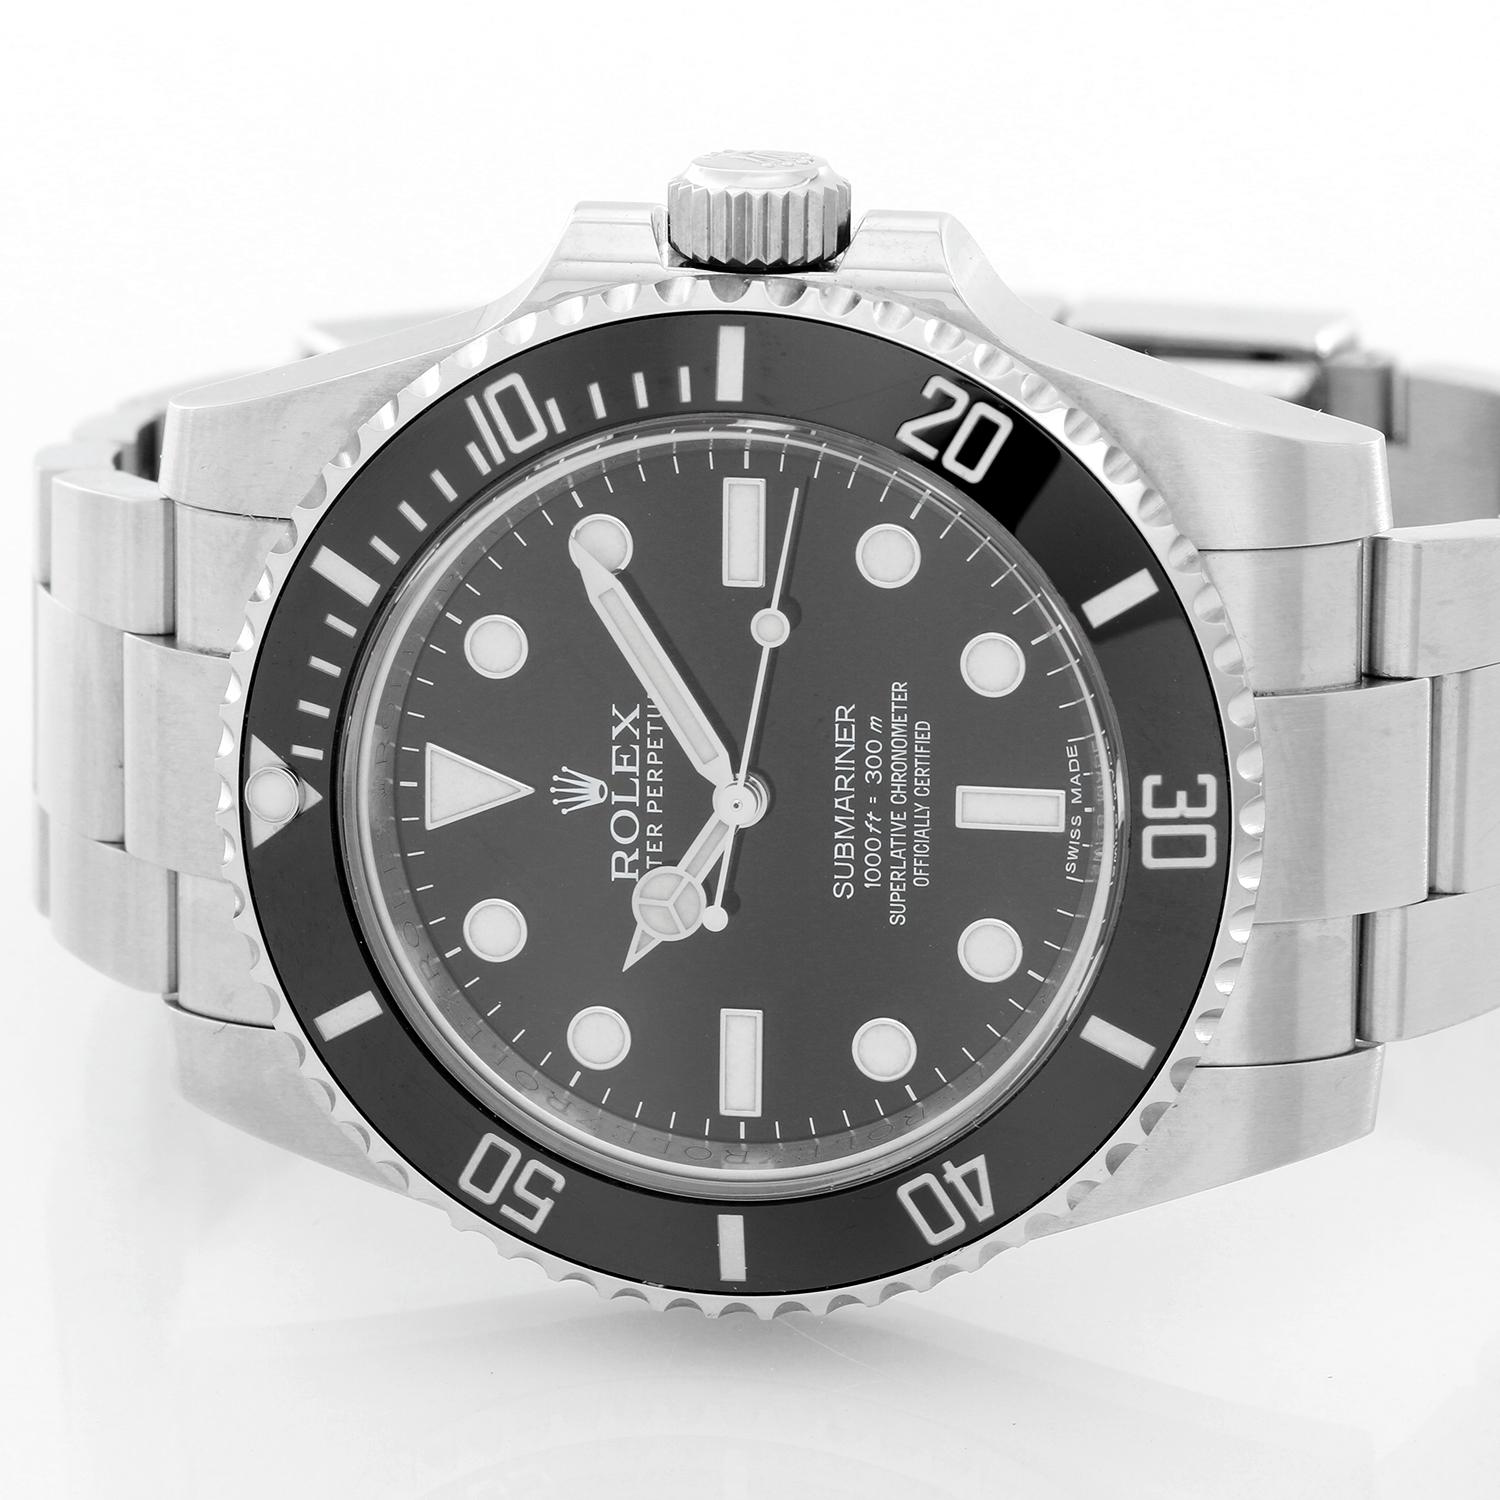 Rolex Submariner Men's Stainless Steel Watch 114060 - Automatic winding, 31 jewels. Stainless steel case with black ceramic bezel insert (40mm diameter). Black dial with luminous style markers. Stainless steel Oyster bracelet with flip-lock clasp.